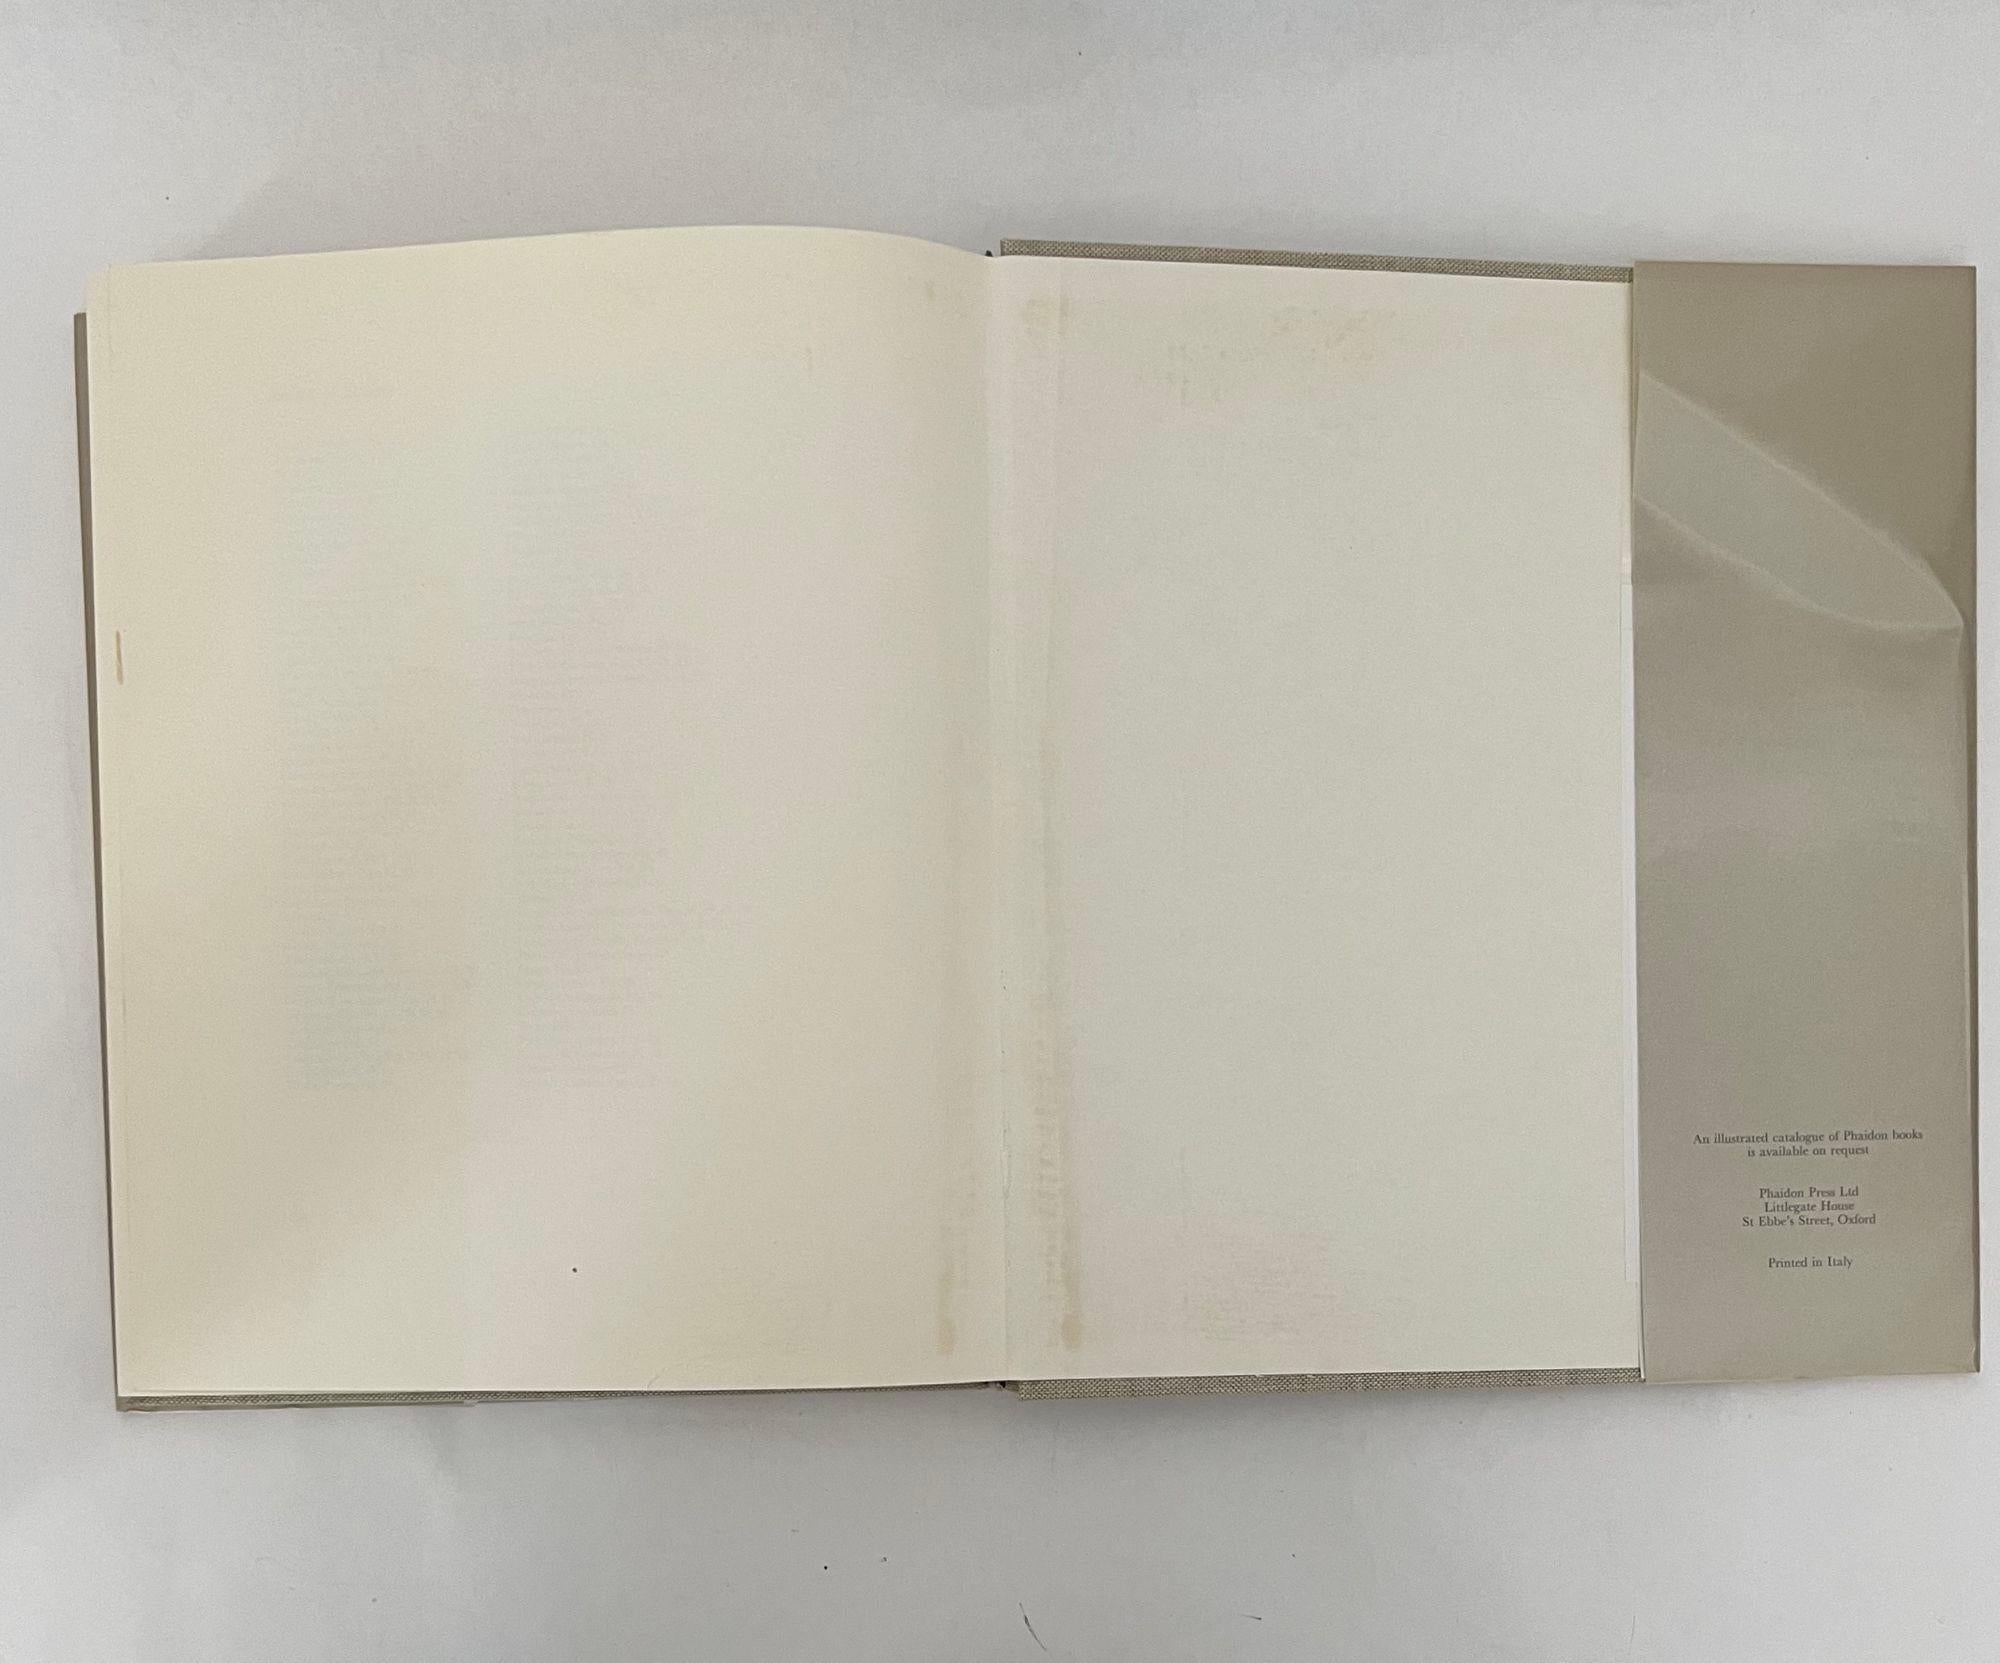 Italian Drawings In Oxford by Terisio Pignatti, First English Publication, 1977 For Sale 3